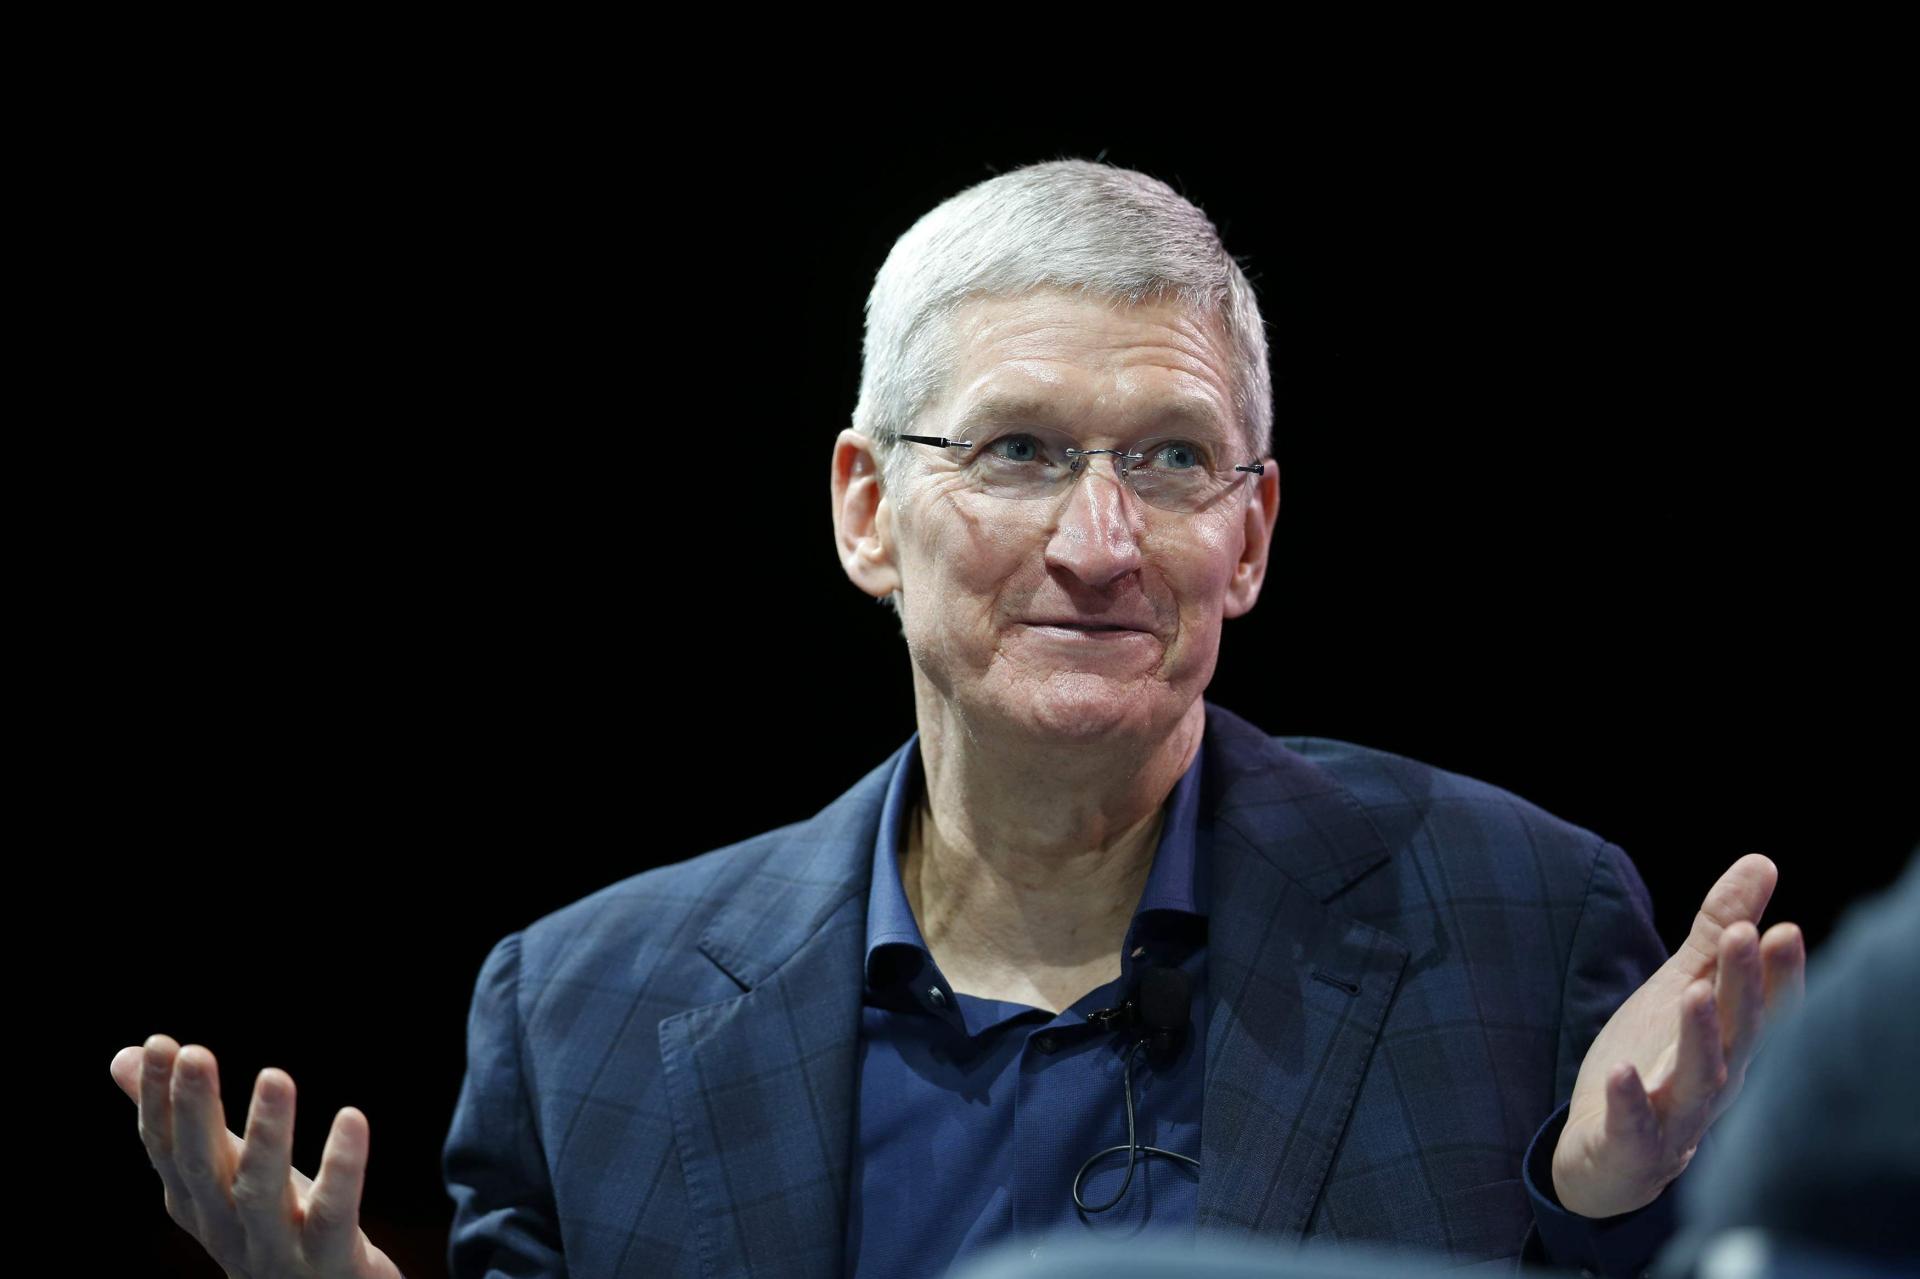 Tim Cook acknowledged Trump’s flub and changed his last name to an Apple logo on Twitter